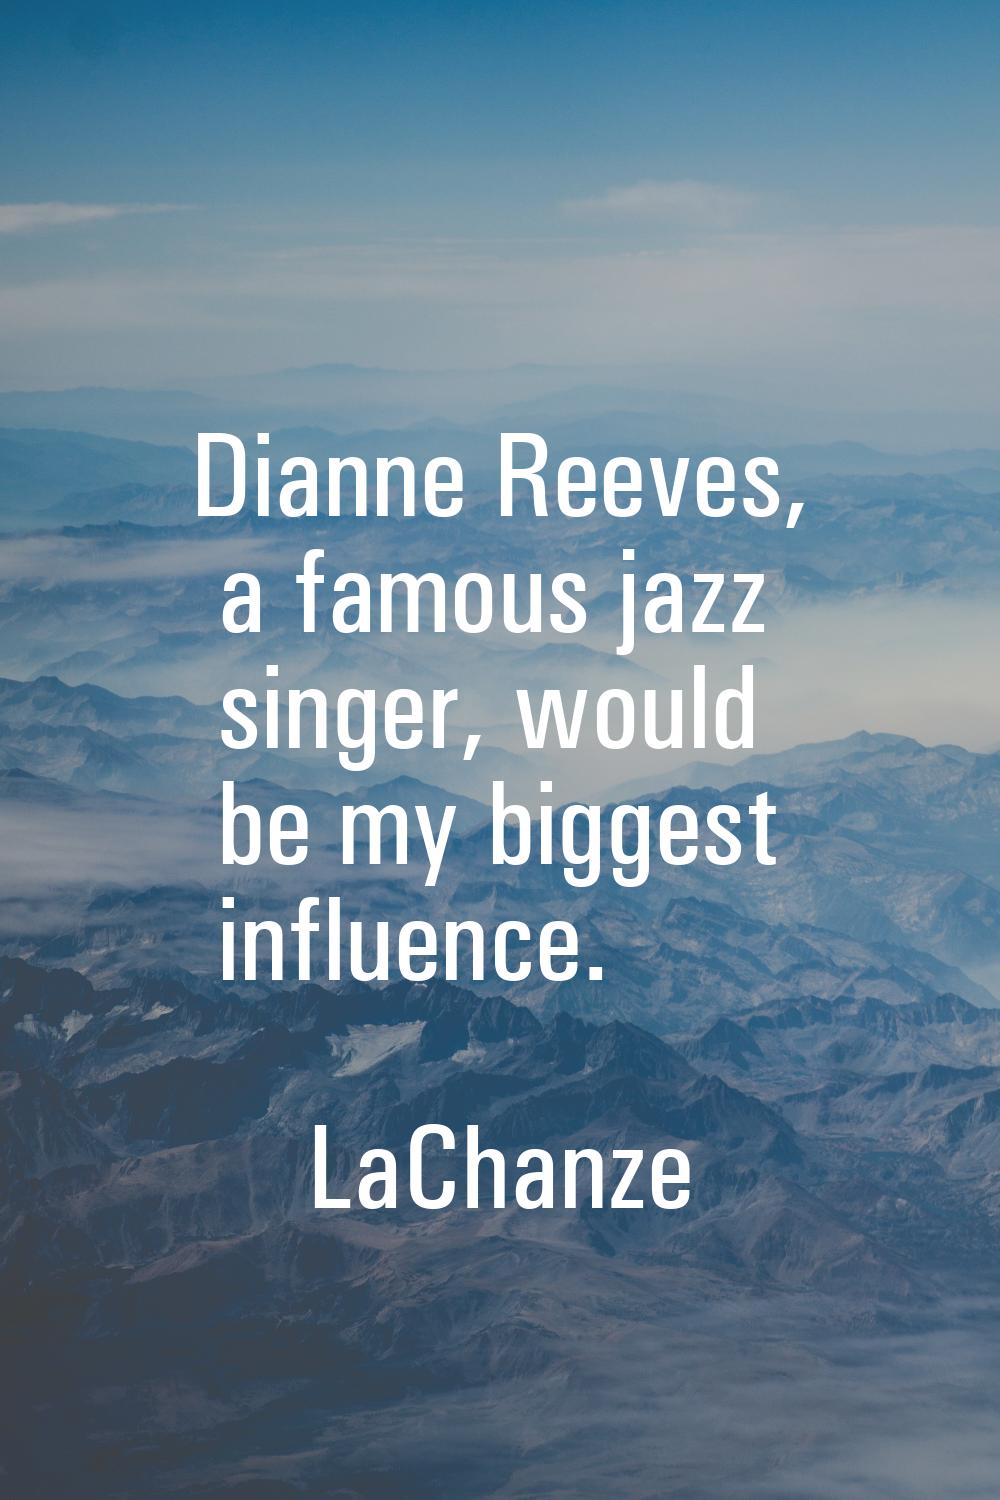 Dianne Reeves, a famous jazz singer, would be my biggest influence.